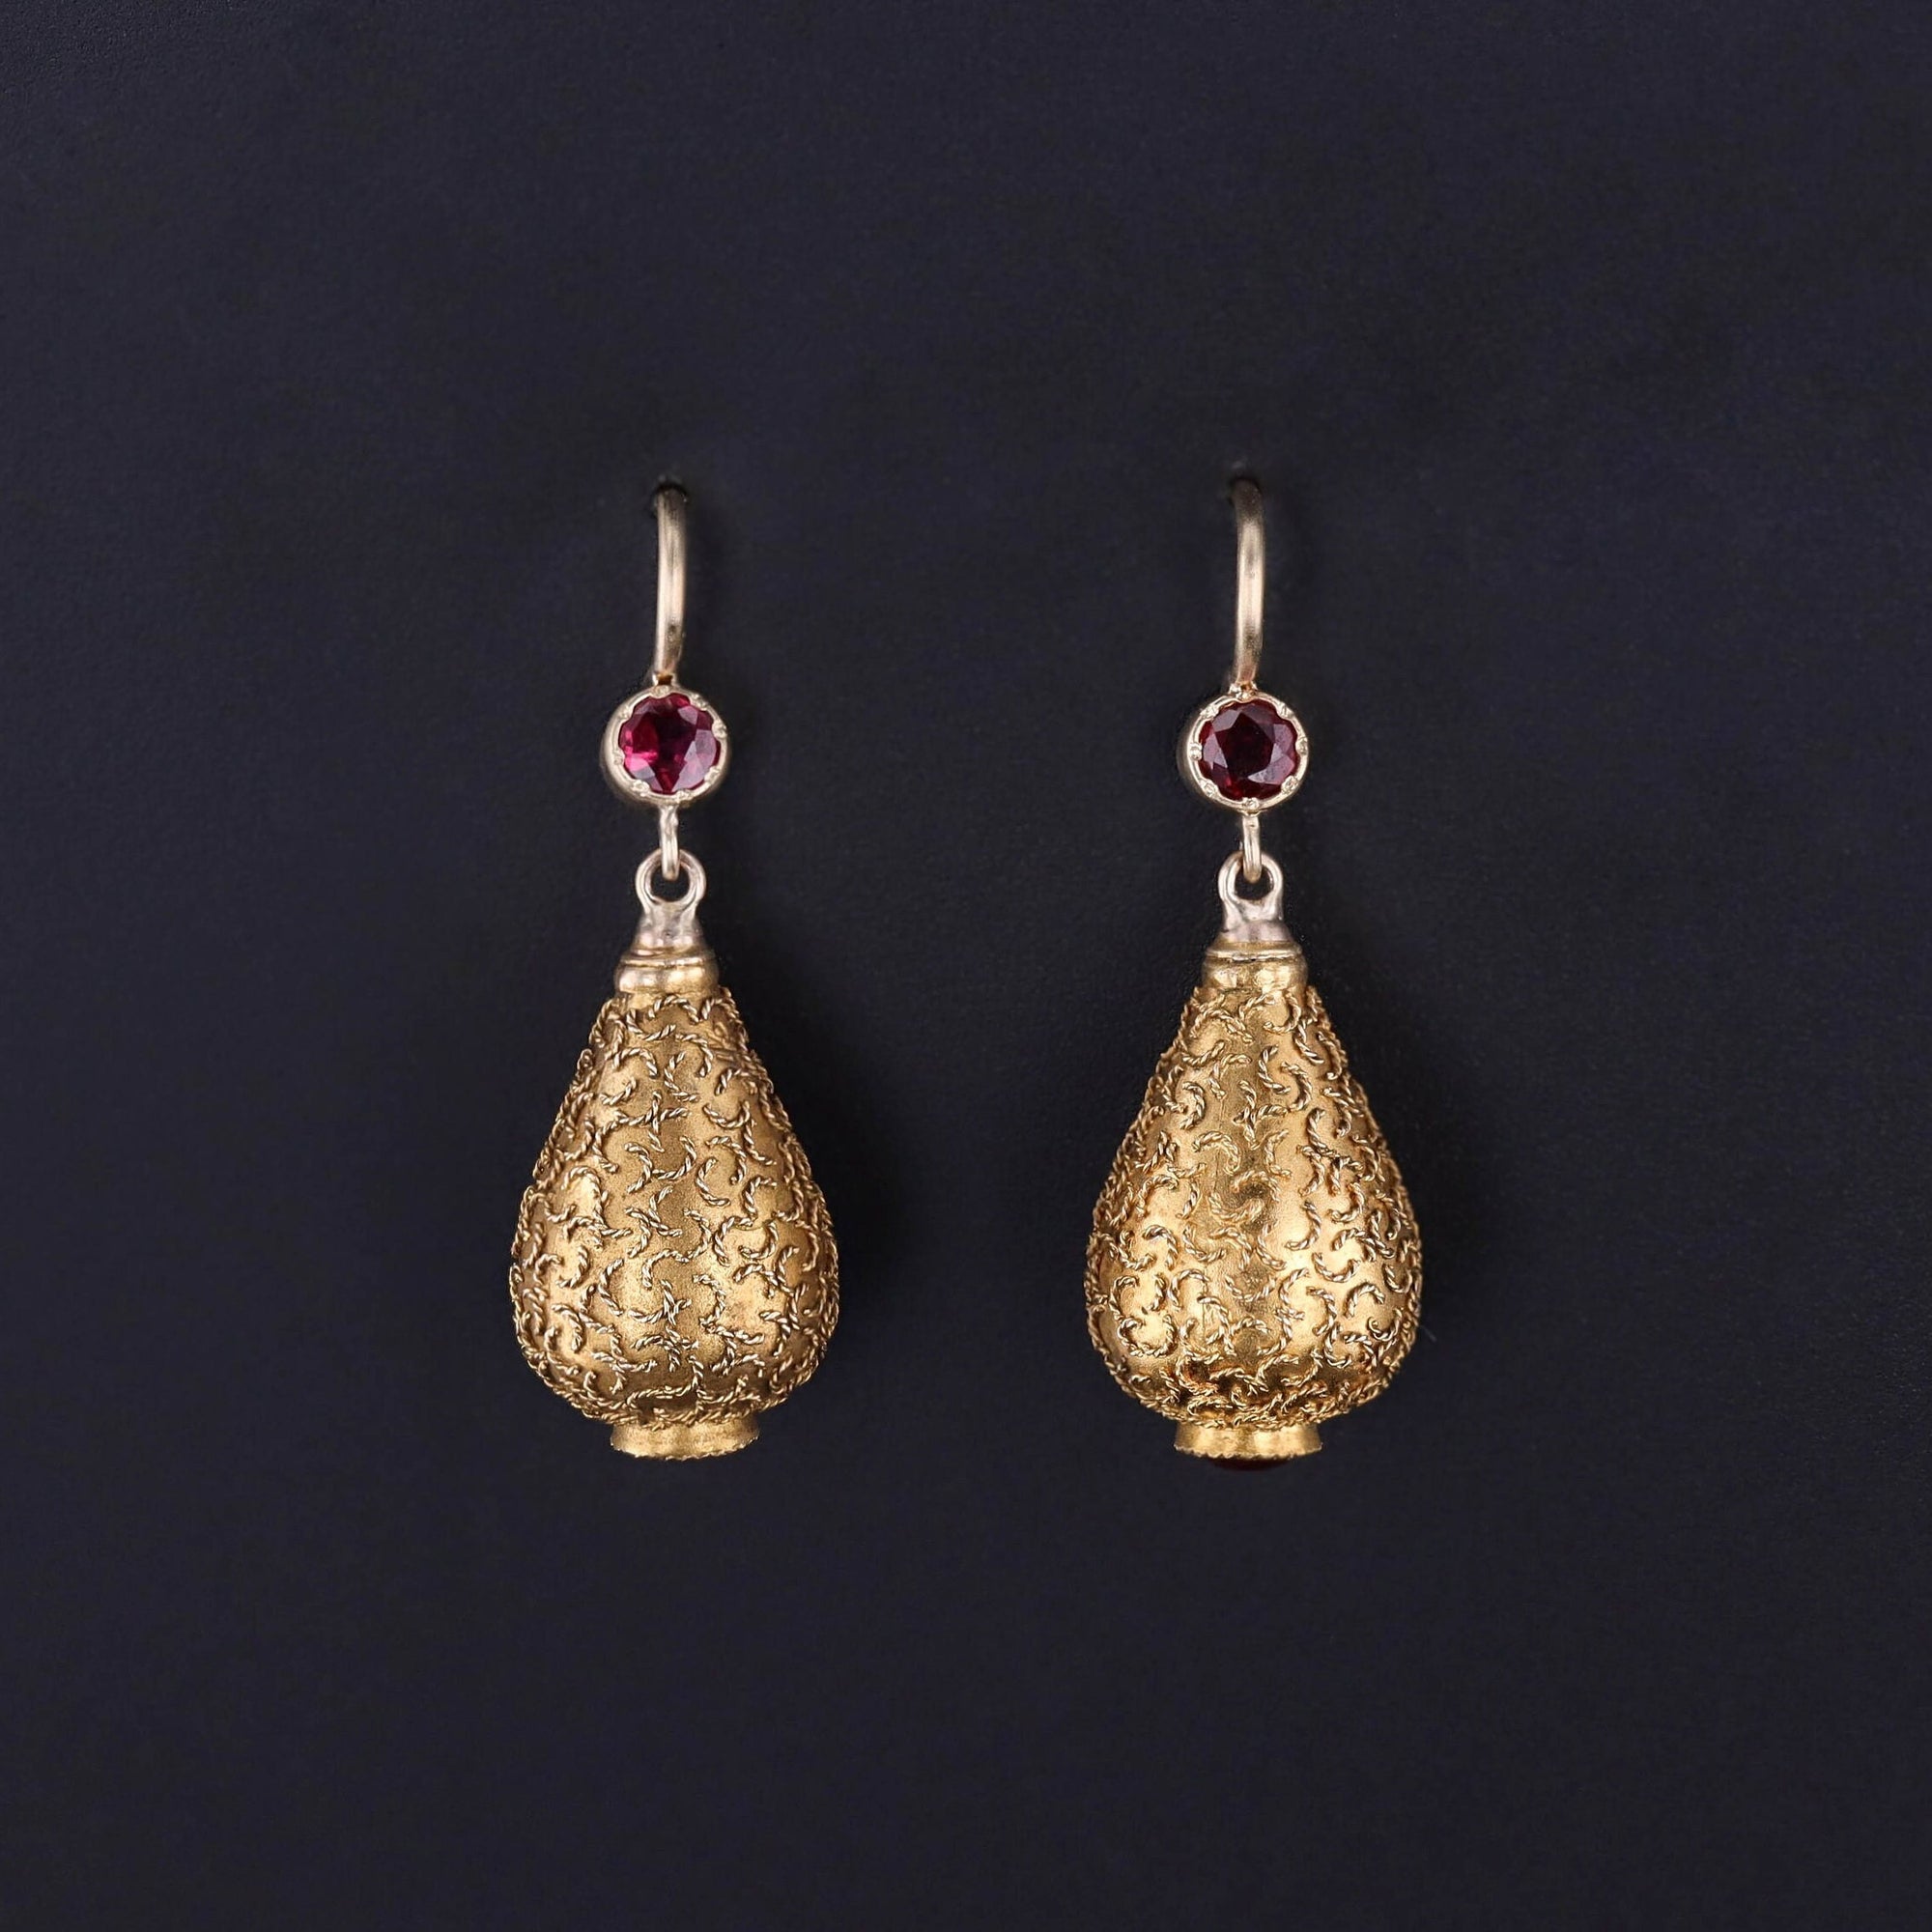 Antique Ruby Conversion Earrings of 14k Gold